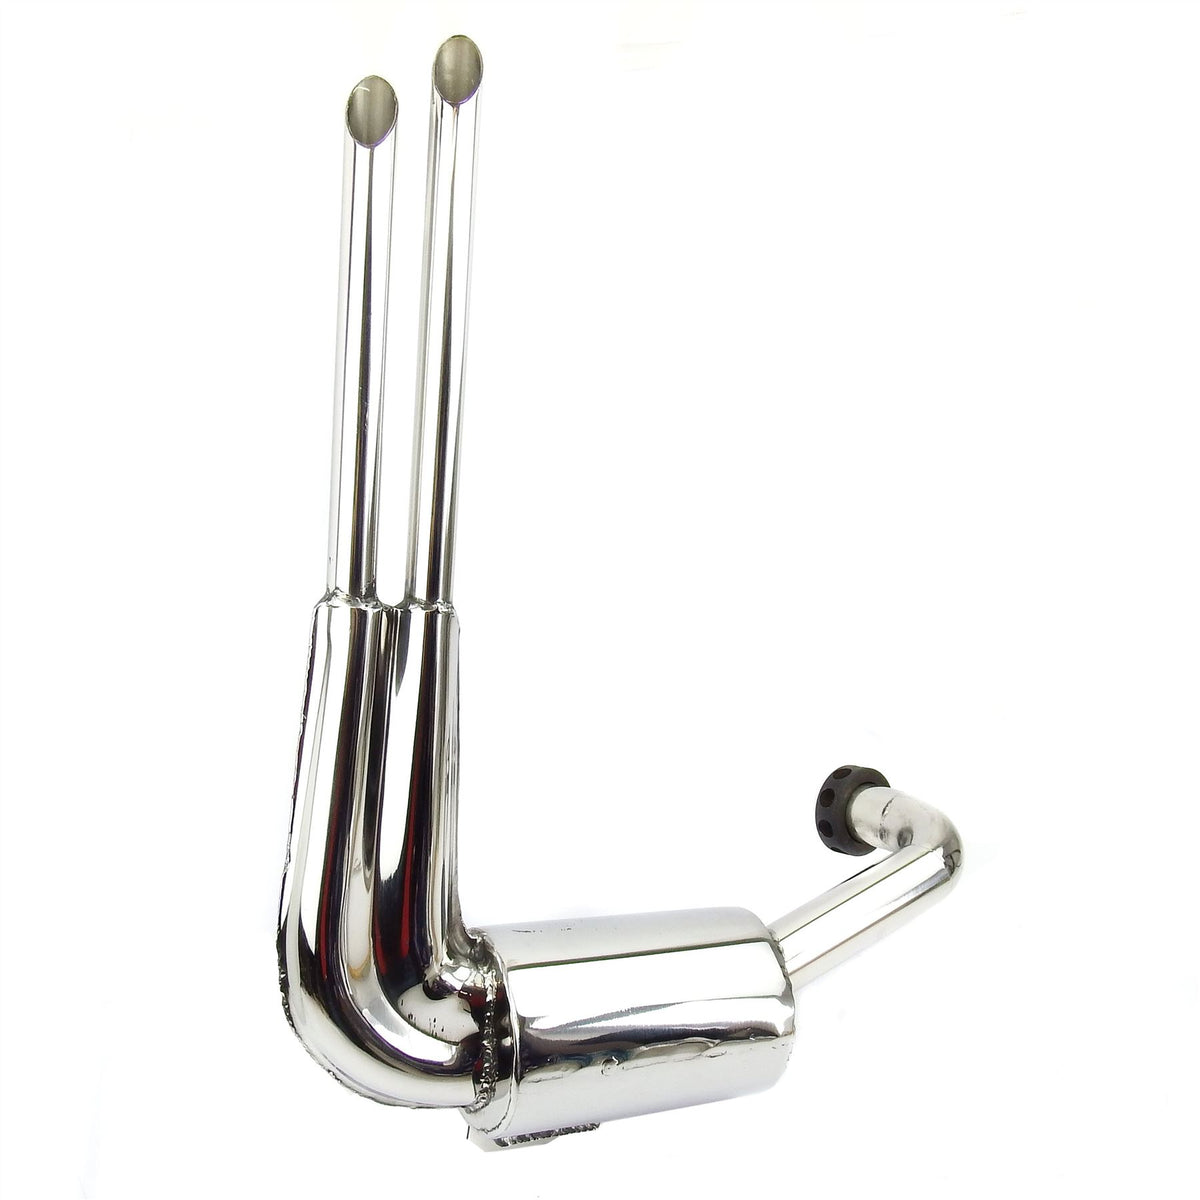 Vespa GS150 Exhaust Retro Twin Tailpipe Abarth Replication - Polished Stainless Steel